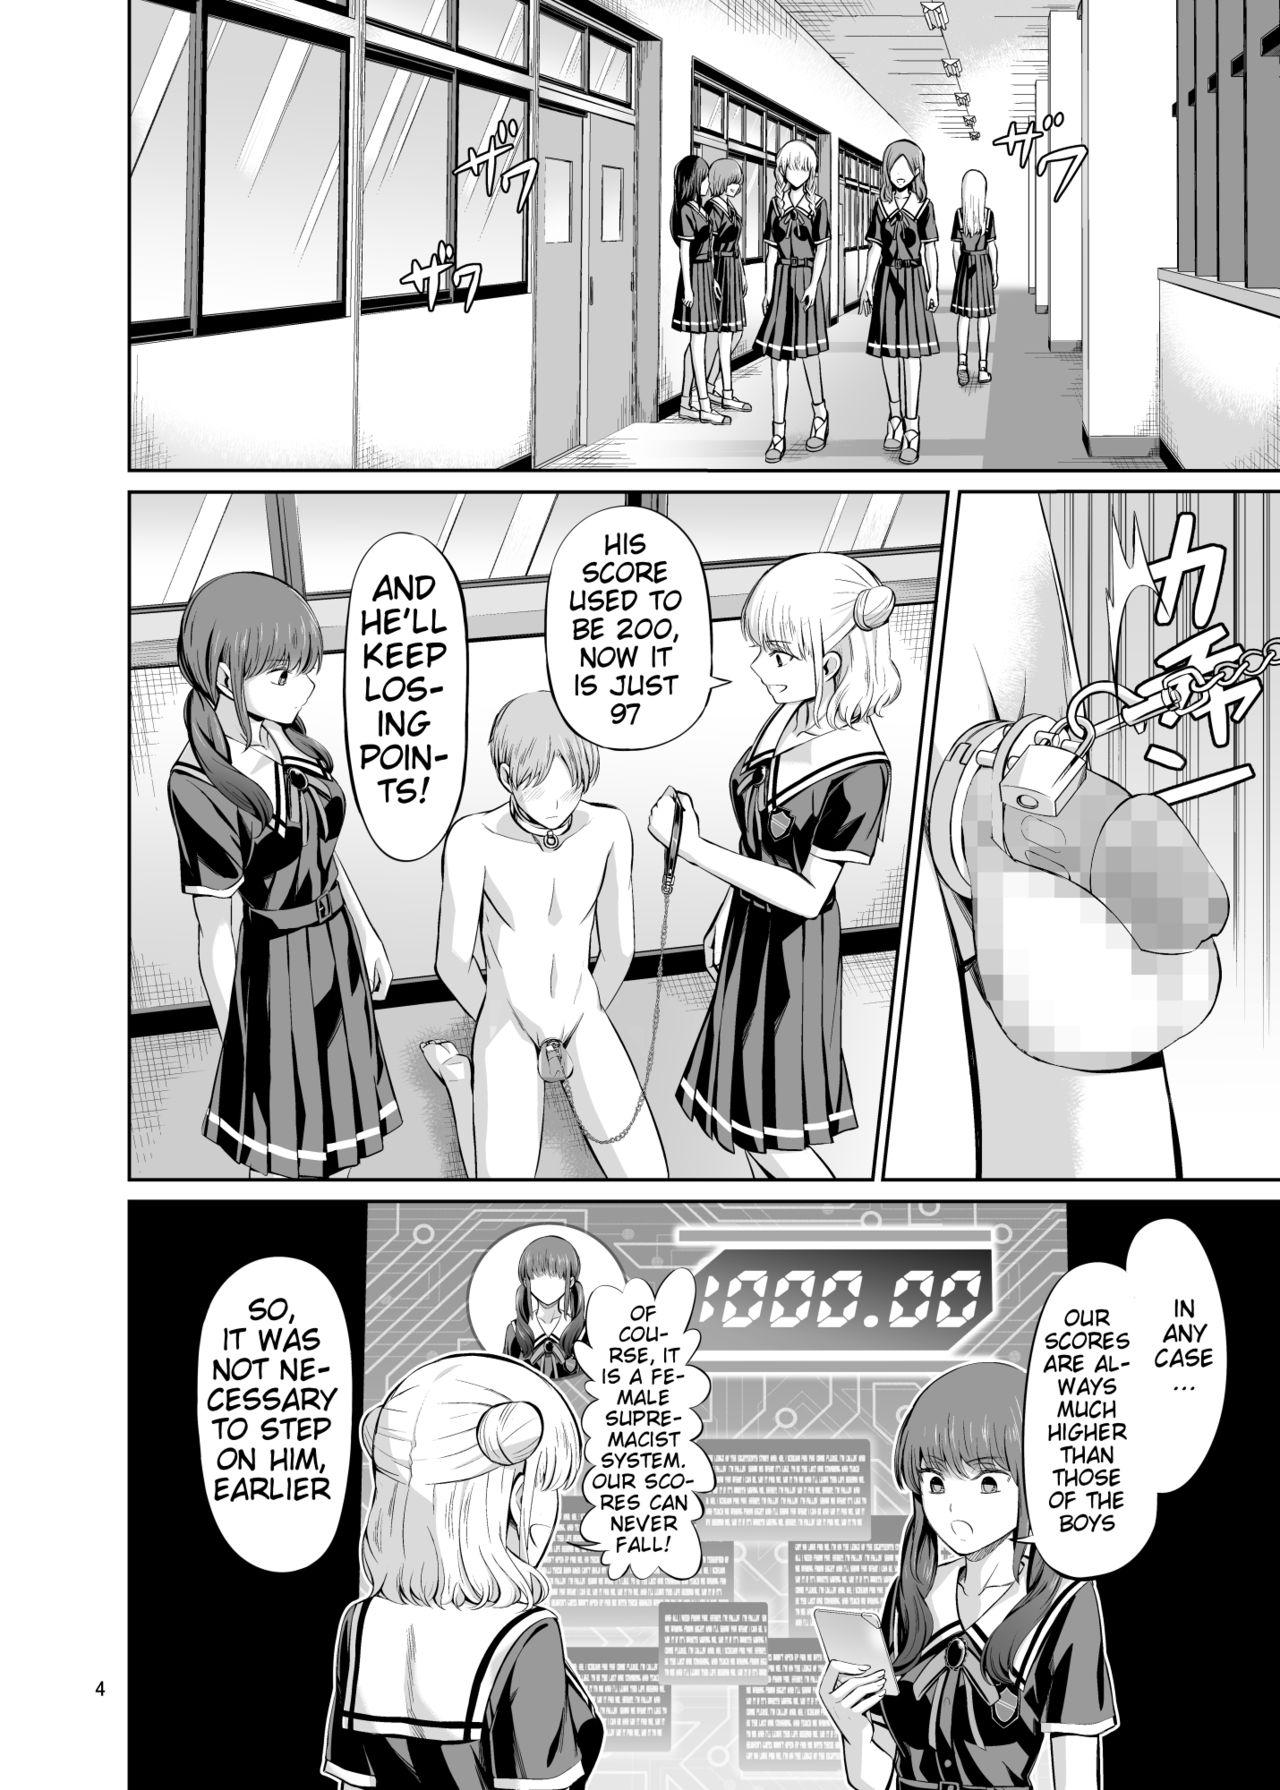 Pink Tensoushugi no Kuni Kouhen | A Country Based on Point System, Second Part - Original Culo Grande - Page 6